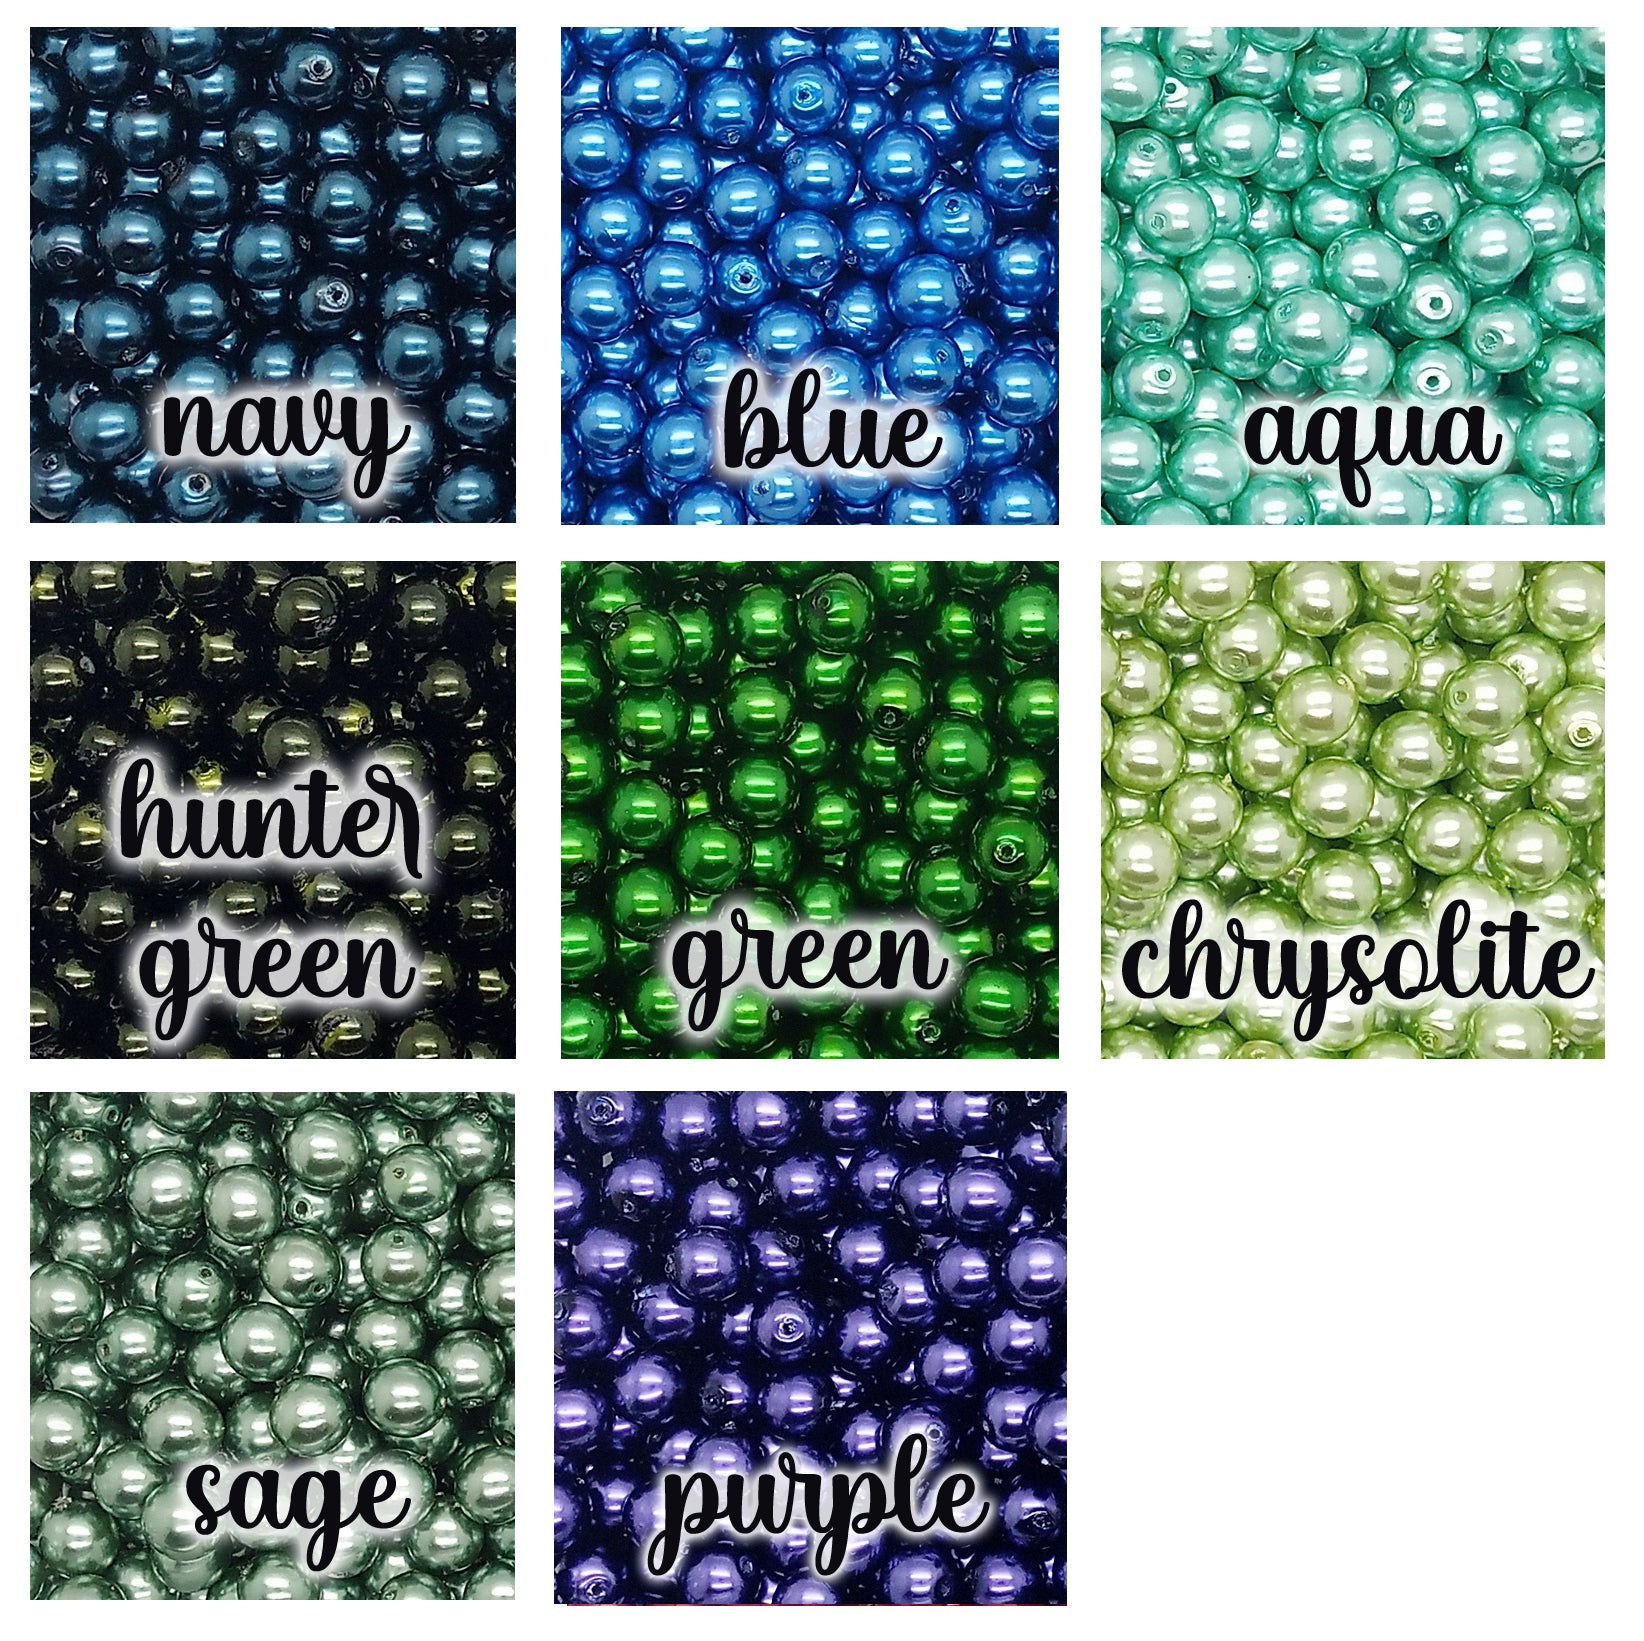 Glass Pearl Charms - 8mm Bead Dangles for DIY Charm Bracelets - Adorabilities Charms & Trinkets